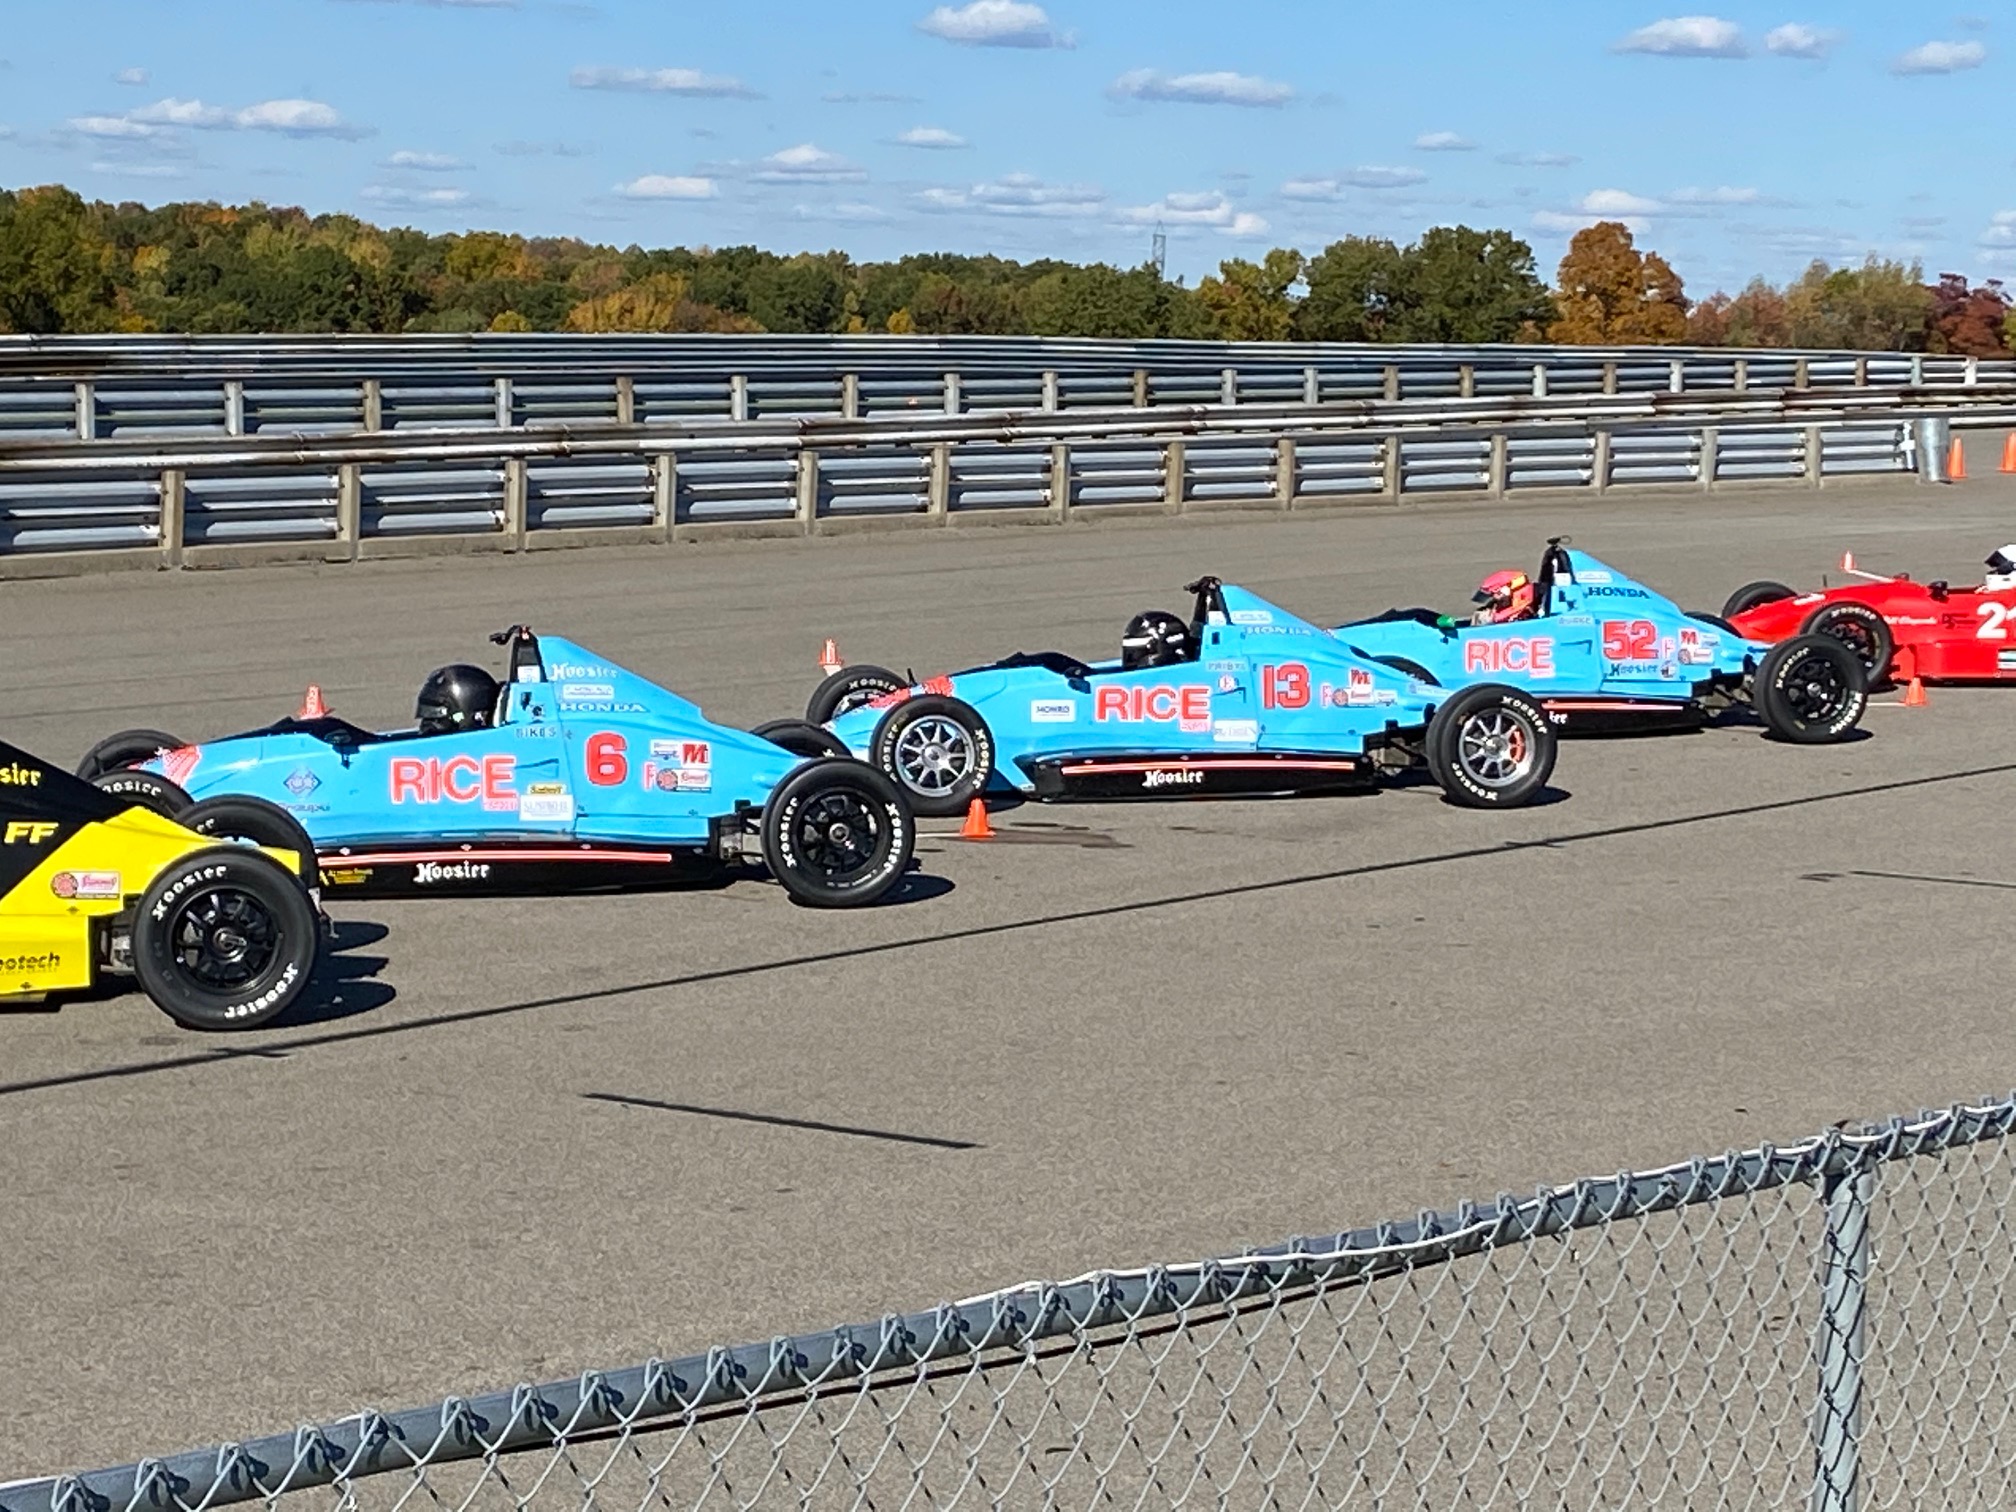 Sikes and RiceRace Still Rolling in FRP F1600 at PIRC